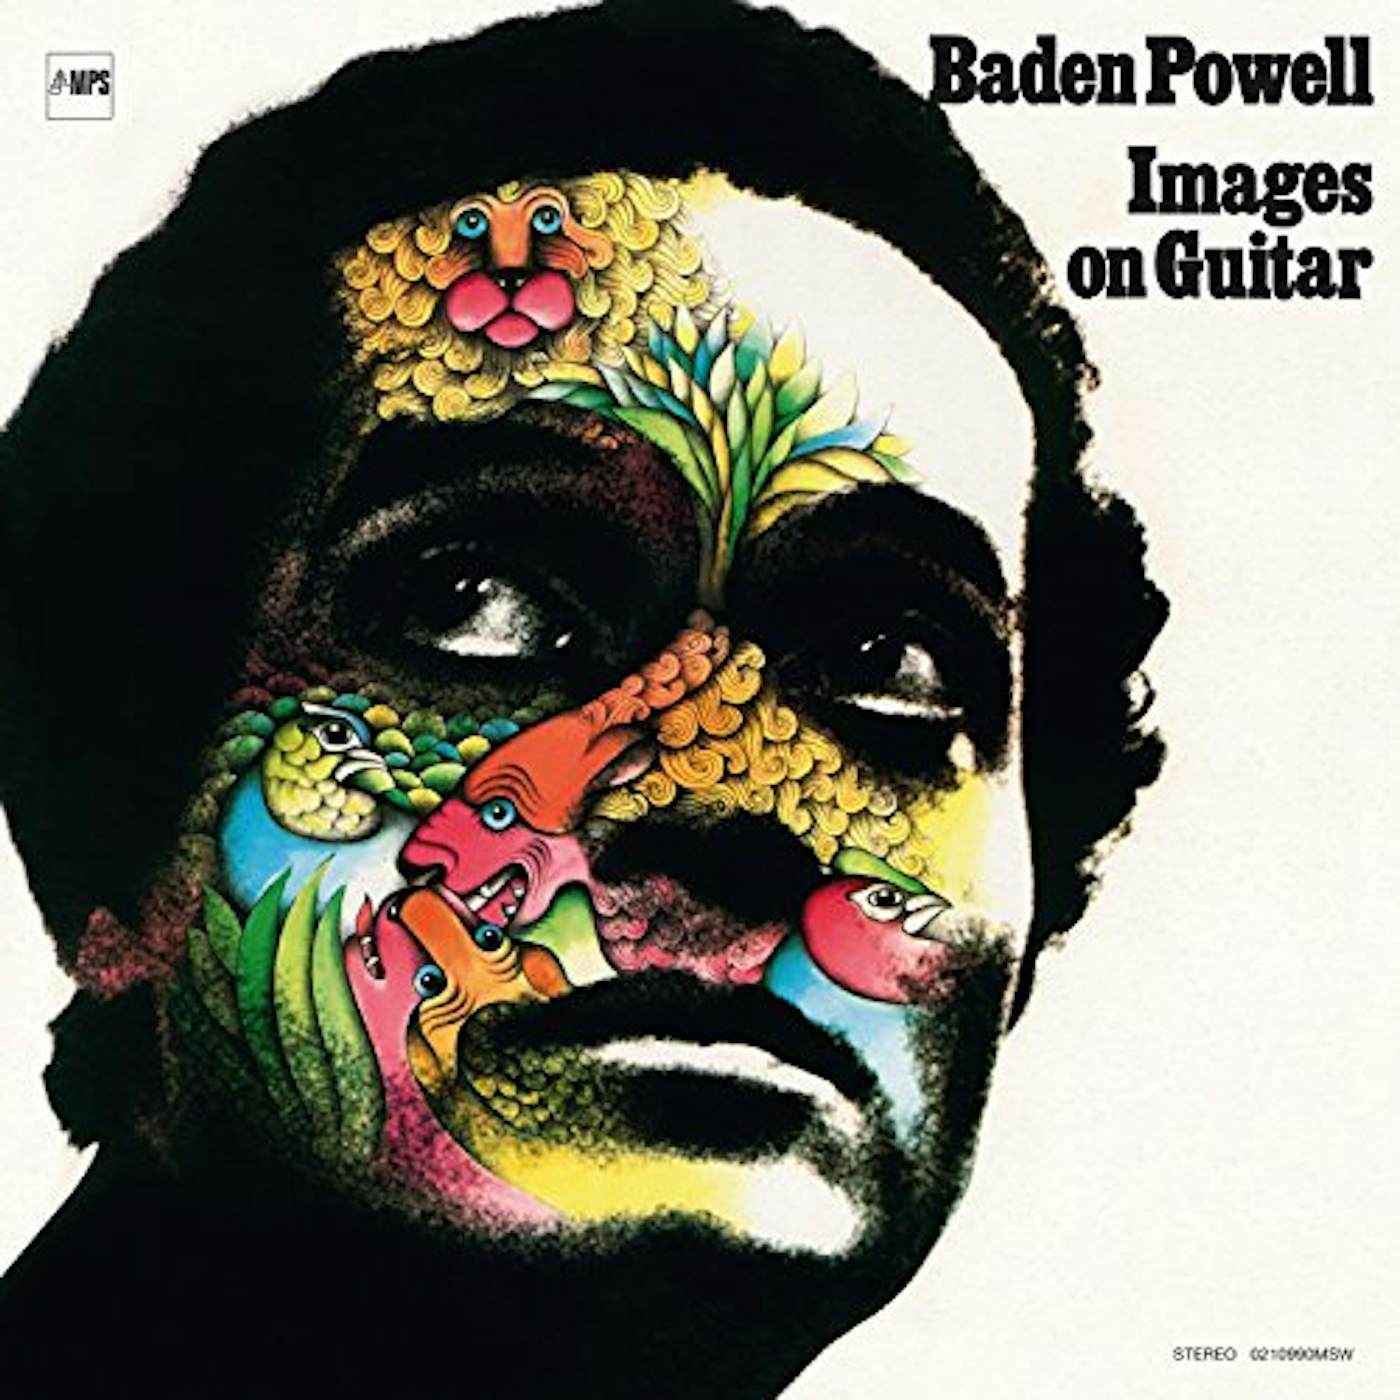 Baden Powell IMAGES ON GUITAR Vinyl Record - UK Release